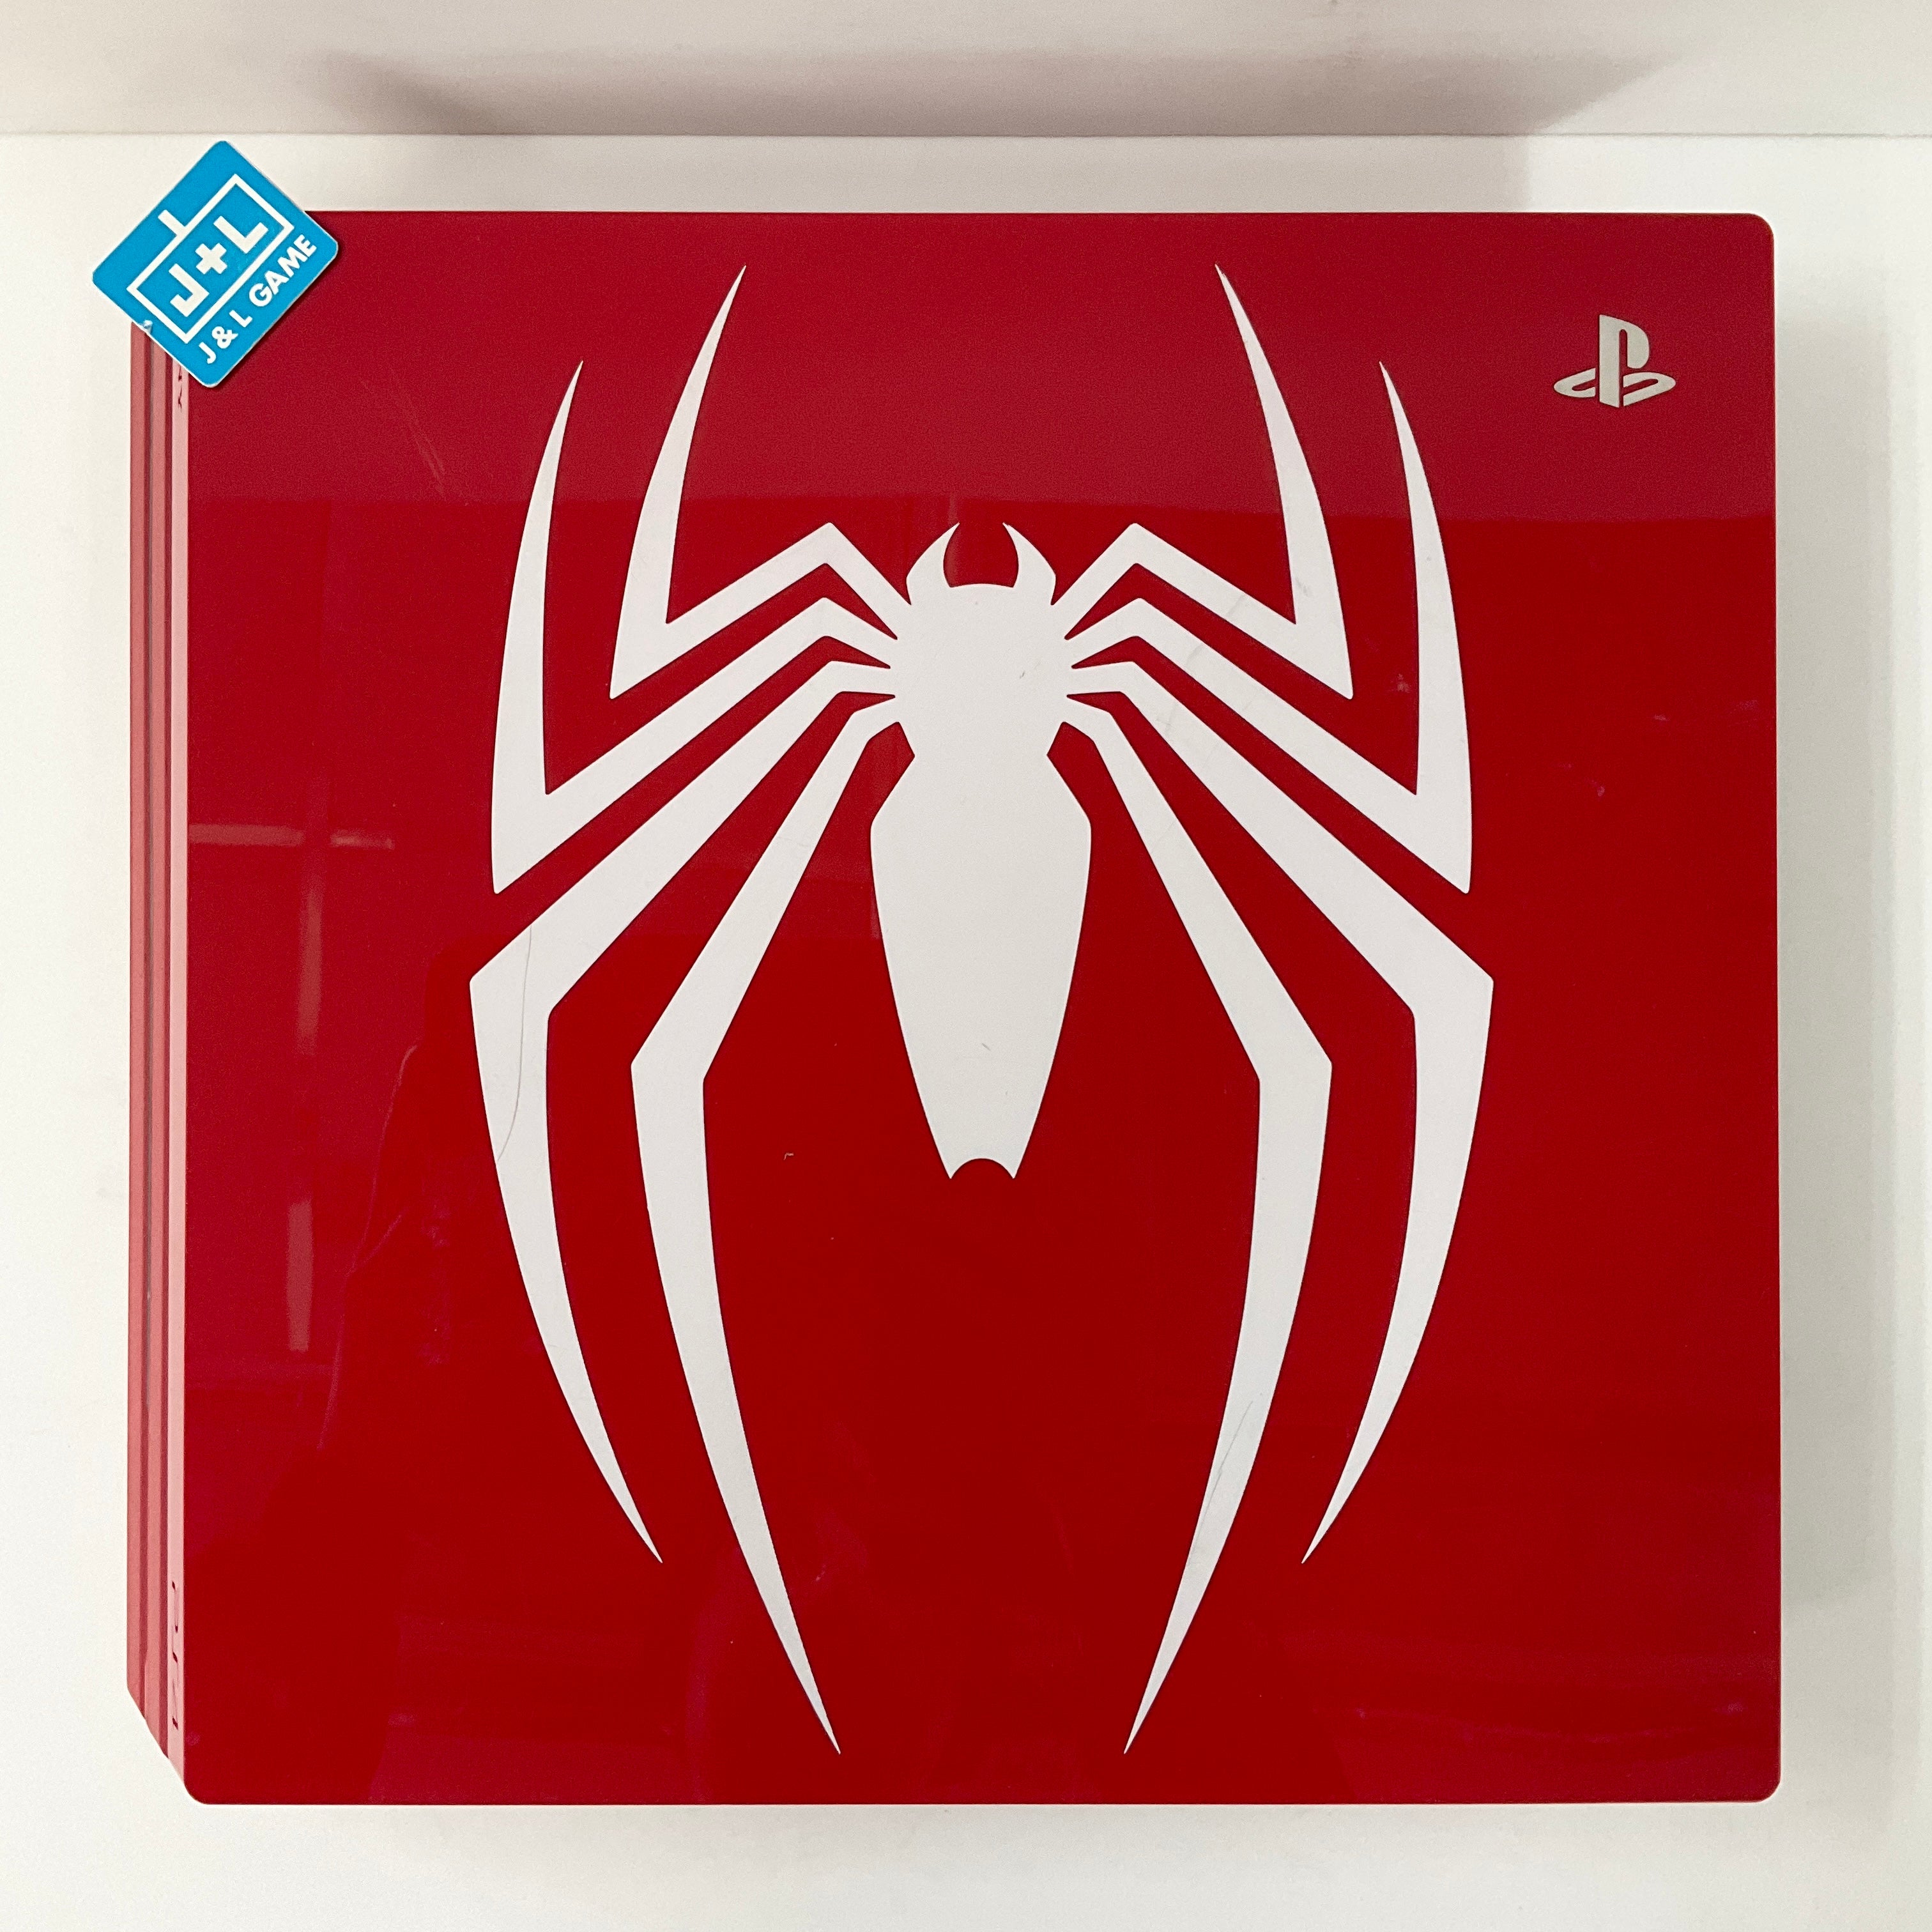 SONY PlayStation 4 Pro 1TB Limited Edition Console (Marvel's Spider-Man Bundle) - (PS4) PlayStation 4 [Pre-Owned] Consoles Sony   